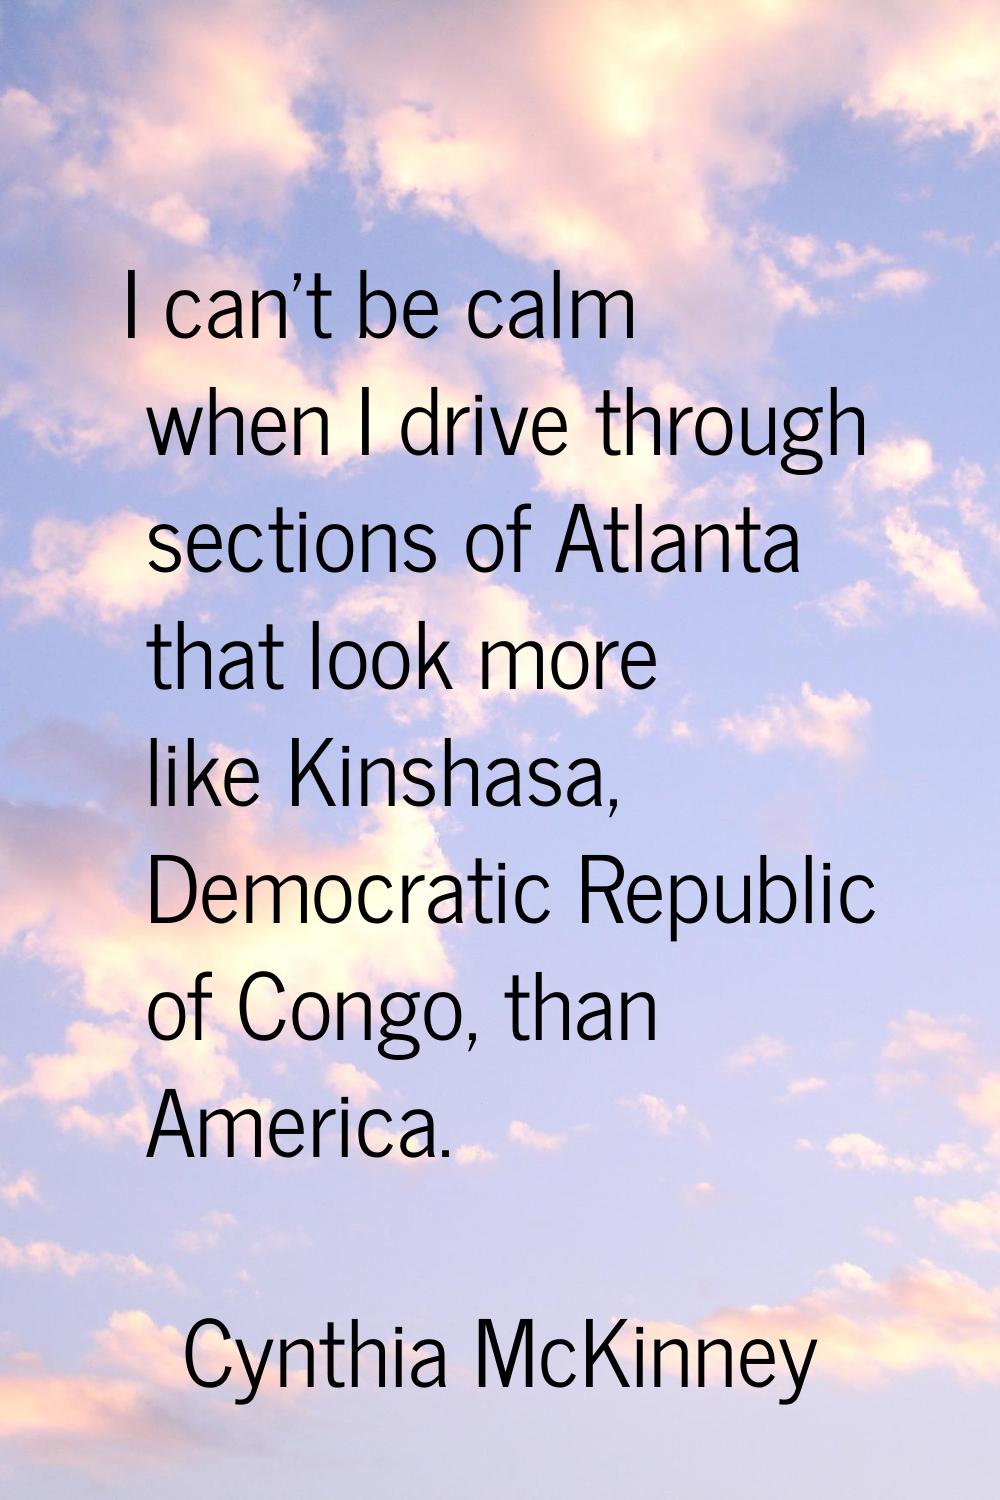 I can't be calm when I drive through sections of Atlanta that look more like Kinshasa, Democratic R